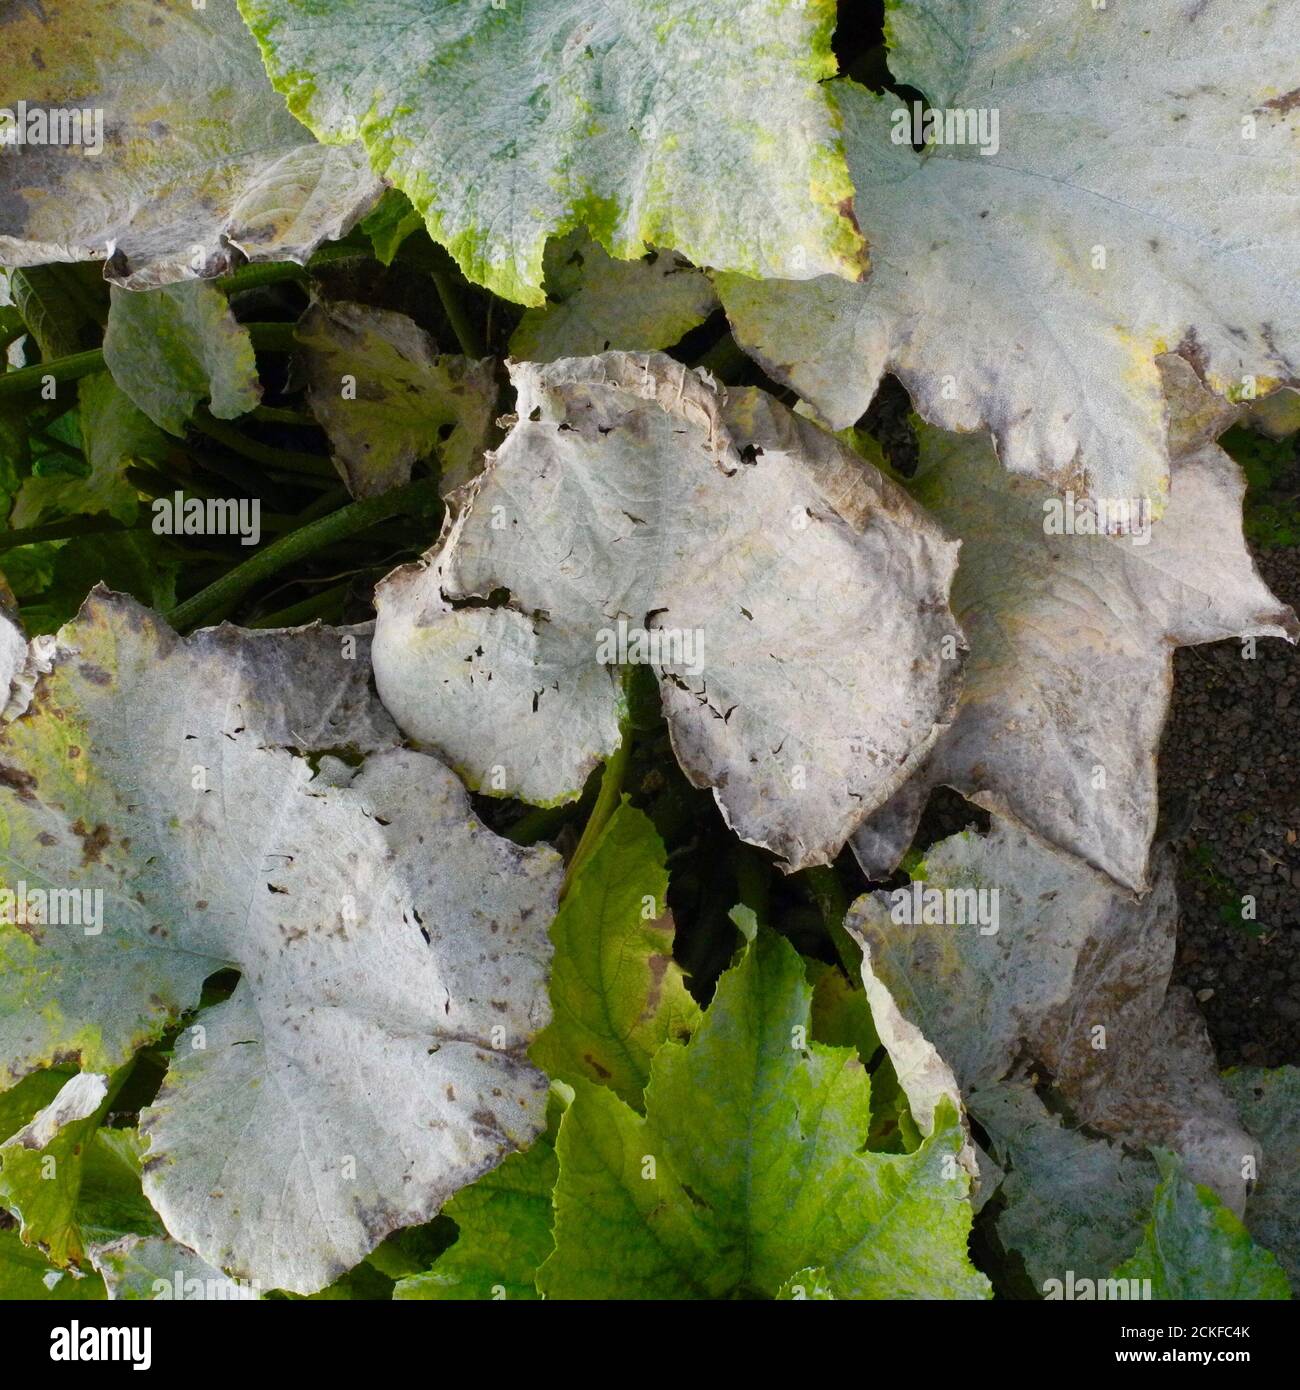 This image shows the advanced stage of Powdery Mildew affecting the leaves of a PUMPKIN. Powdery mildew is a fungal disease that affects a wide range of plants. Powdery mildew diseases are caused by many different species of fungi in the order Erysiphales, with Podosphaera xanthii being the most commonly reported cause. Common on PUMPKINS CUCUMBERS COURGETTES and other members of the SQUASH family. Stock Photo